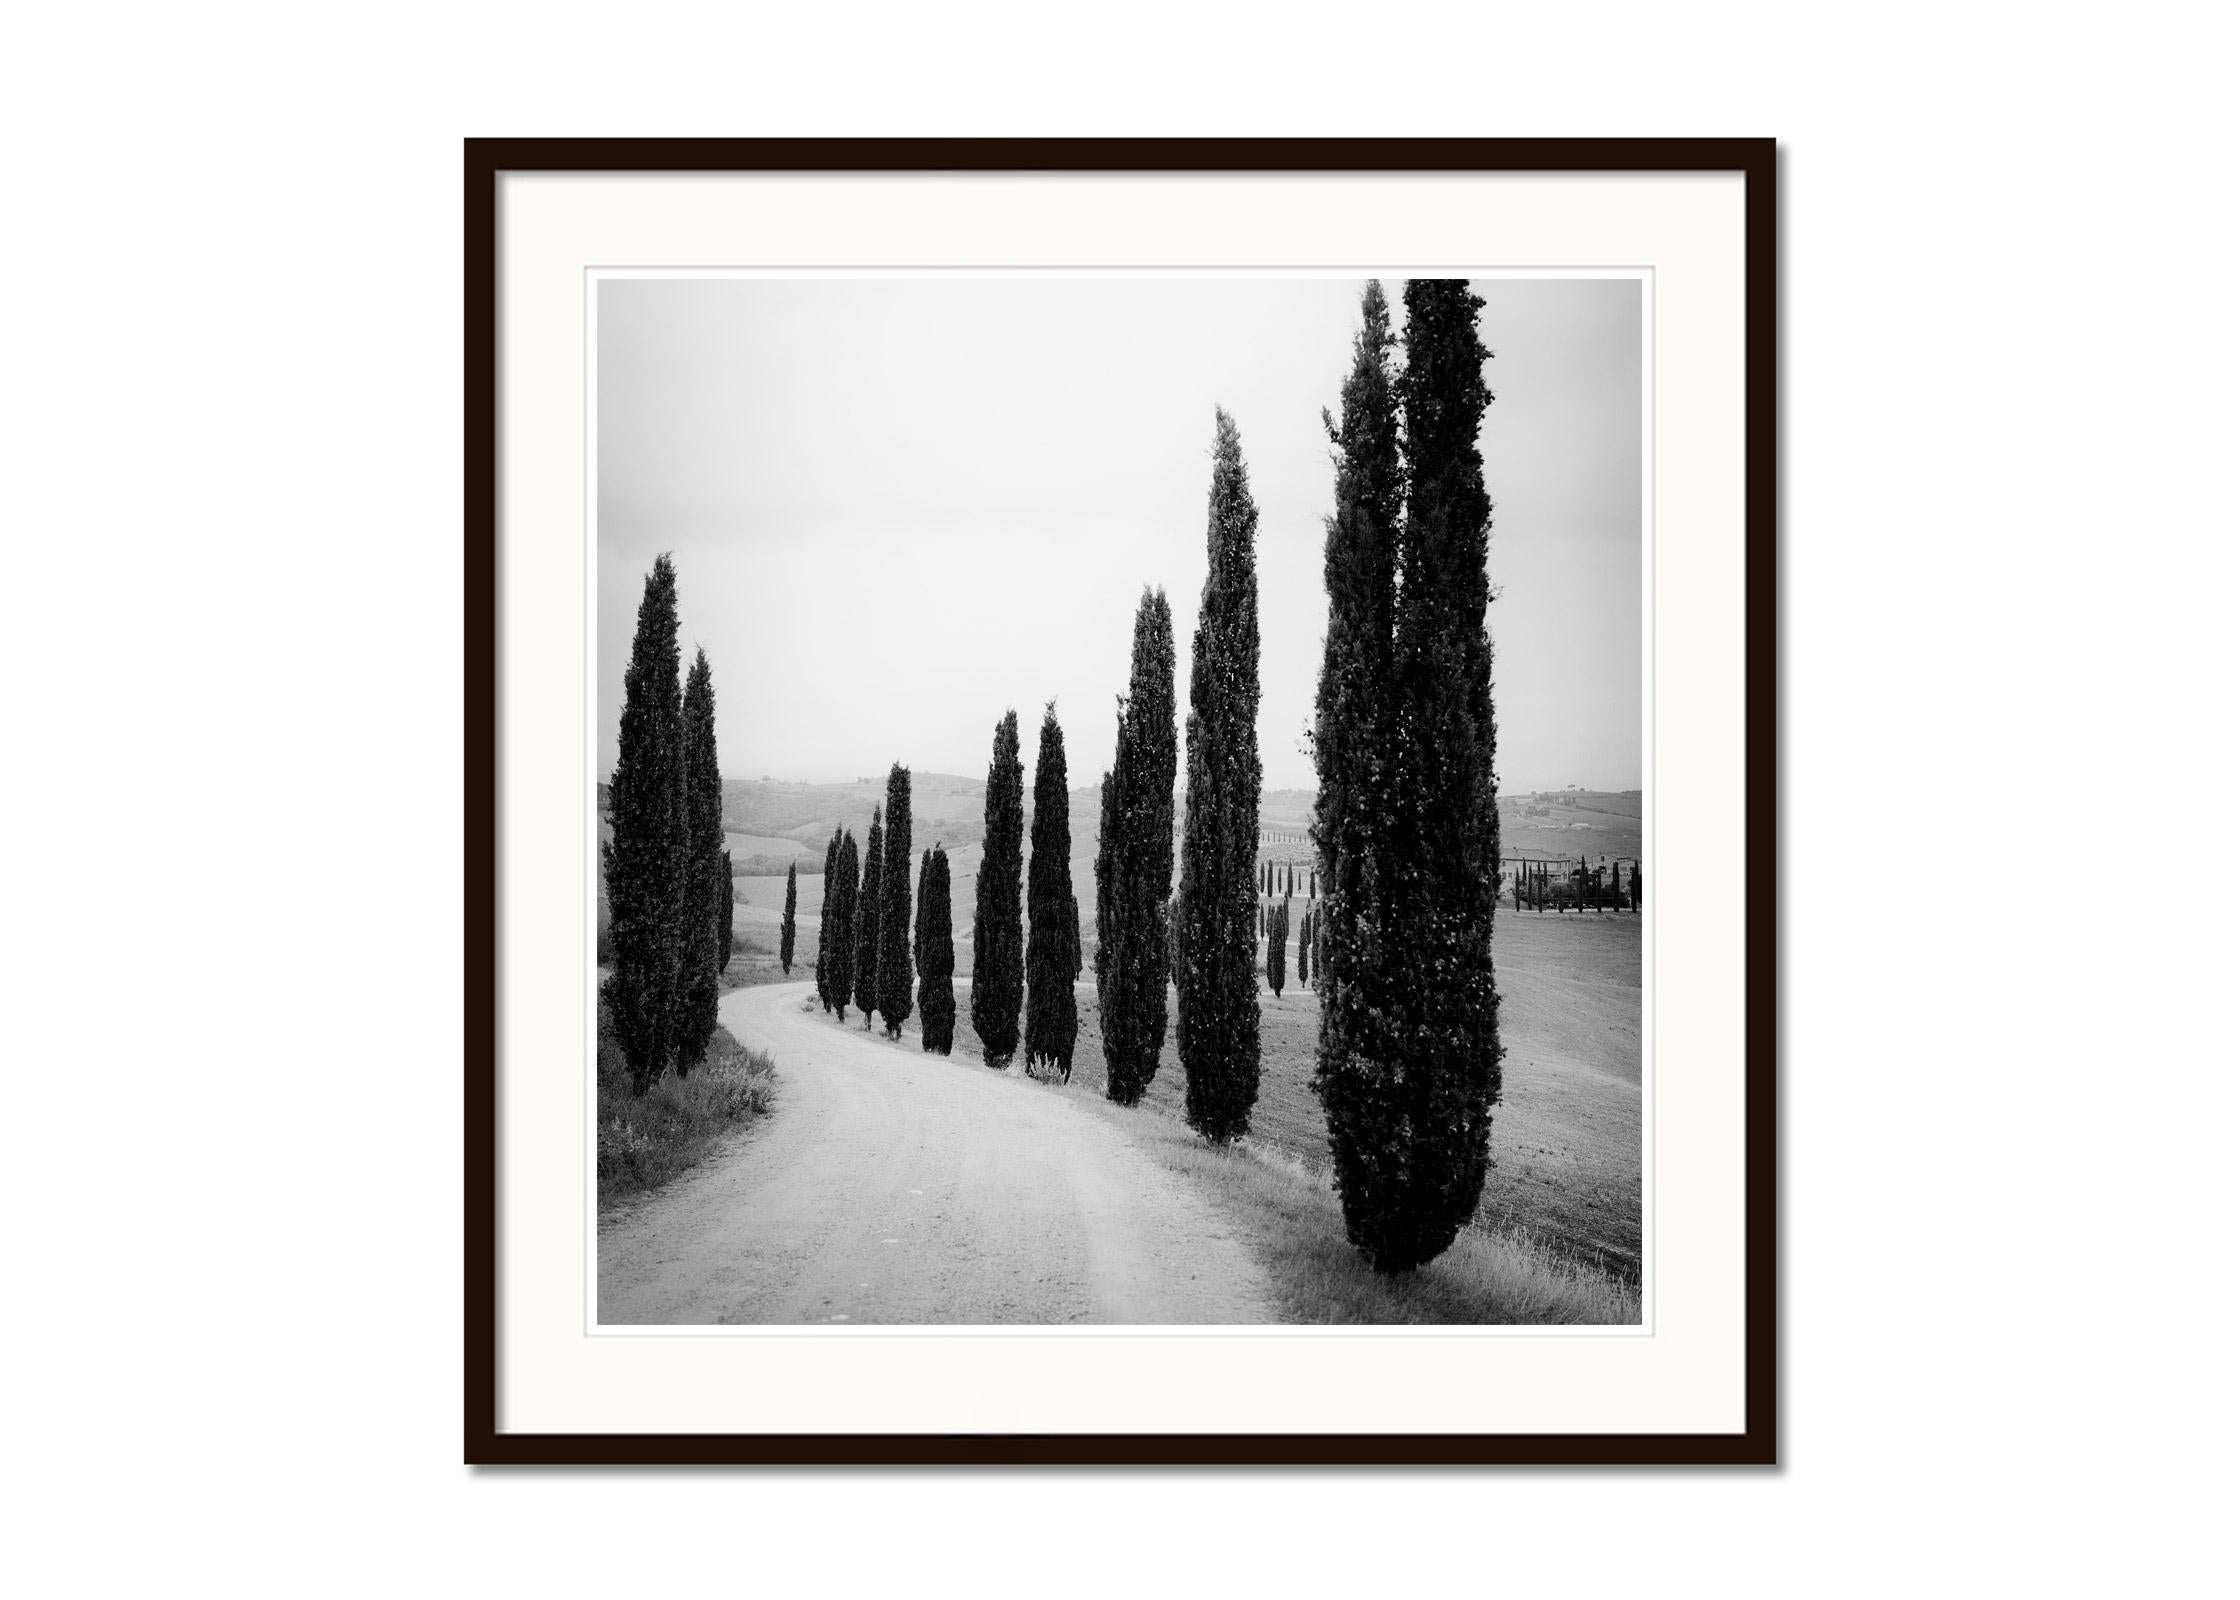 Cypress Trees, along the Road, Tuscany, black and white photography, landscape - Gray Landscape Photograph by Gerald Berghammer